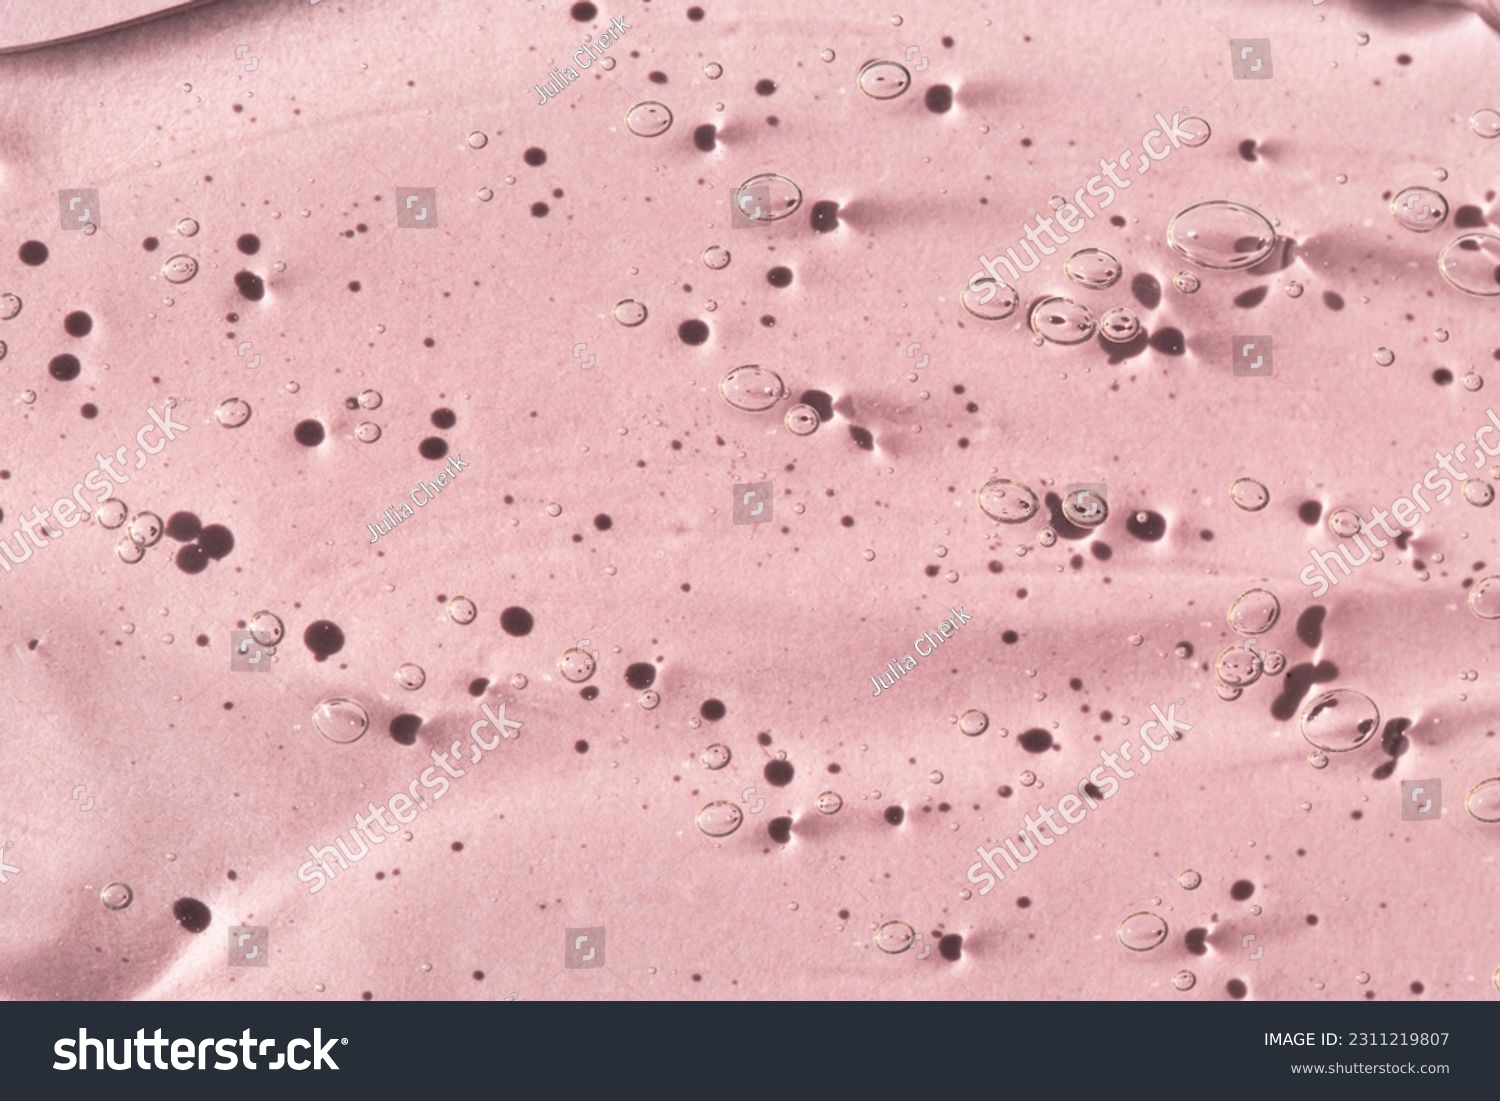 Transparent cosmetic texture of serum, skin gel on a pink background, macro top view. #2311219807